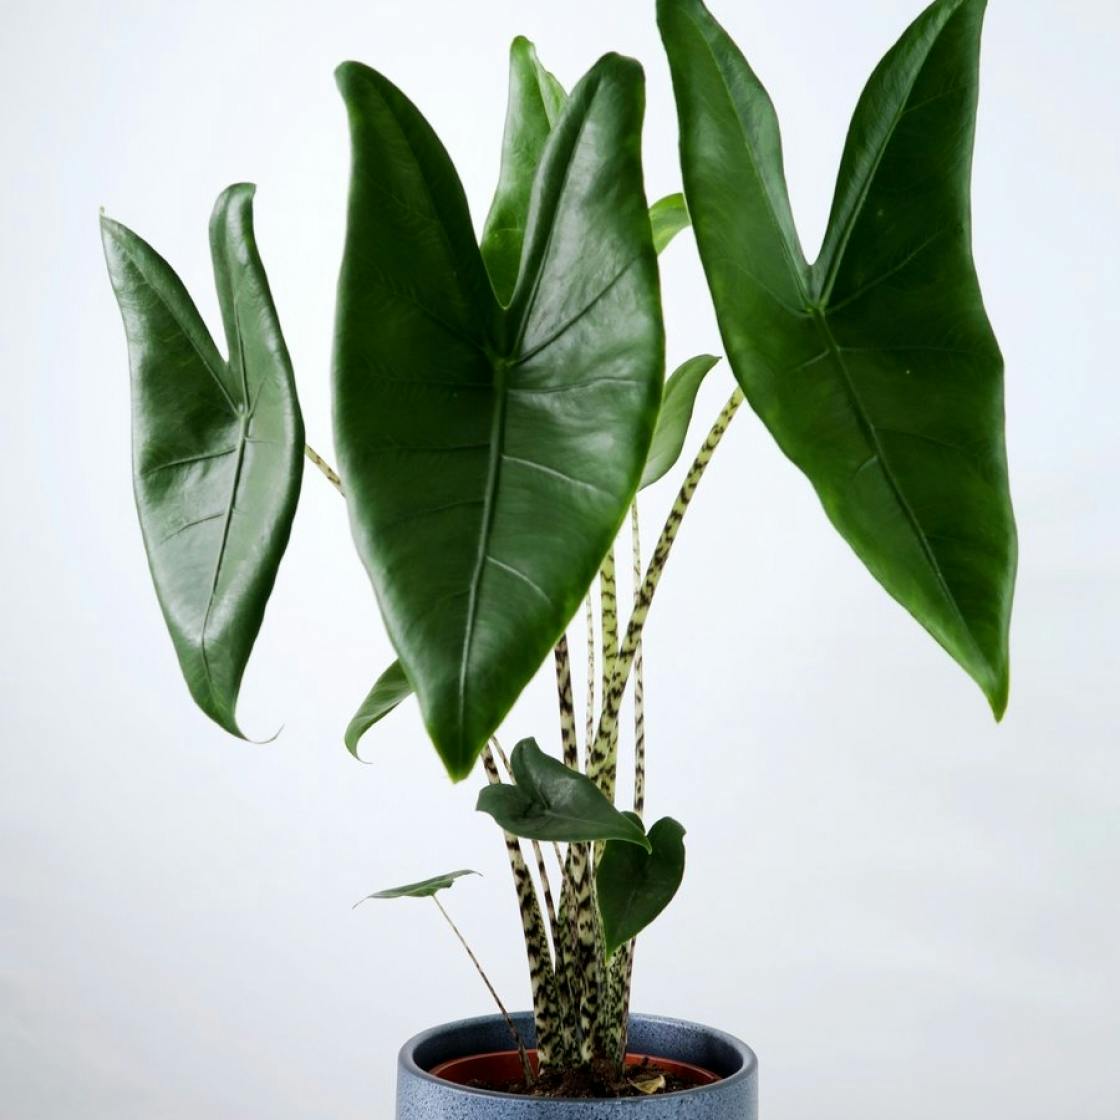 7 Unusual Houseplants To Add A Splash Of Excitement To Your Home